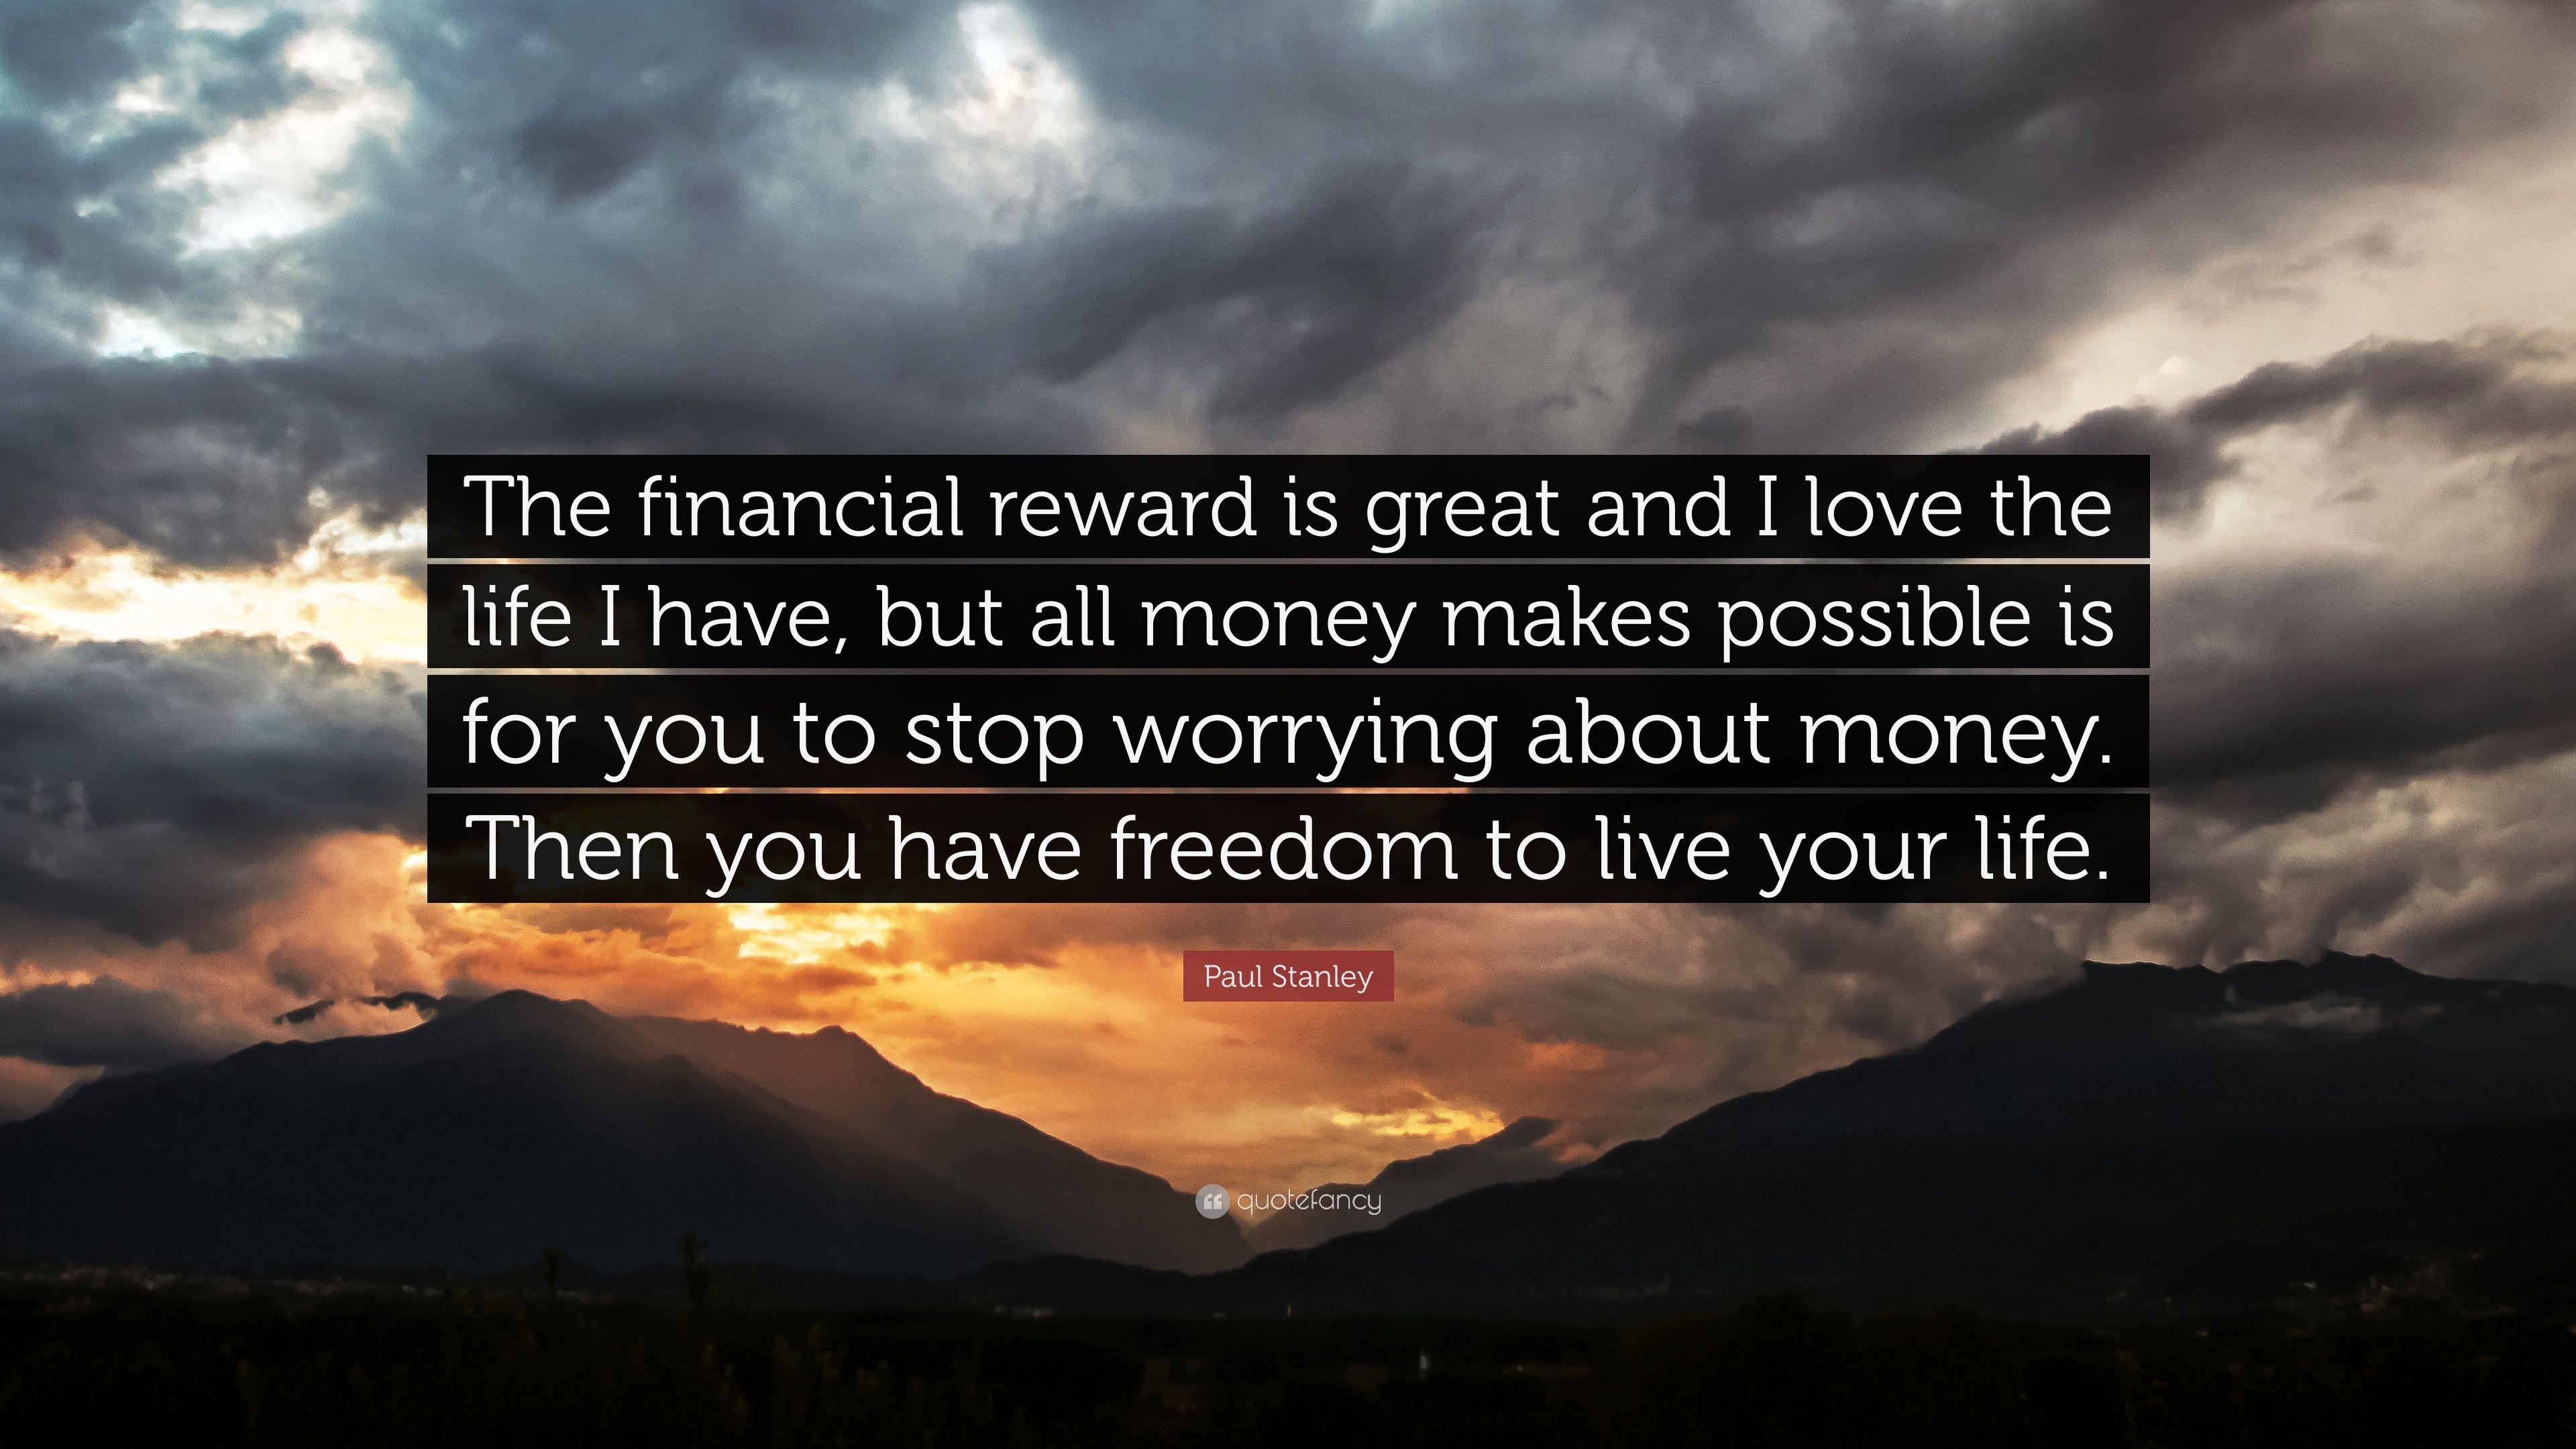 Paul Stanley Quote: “The financial reward is great and I love